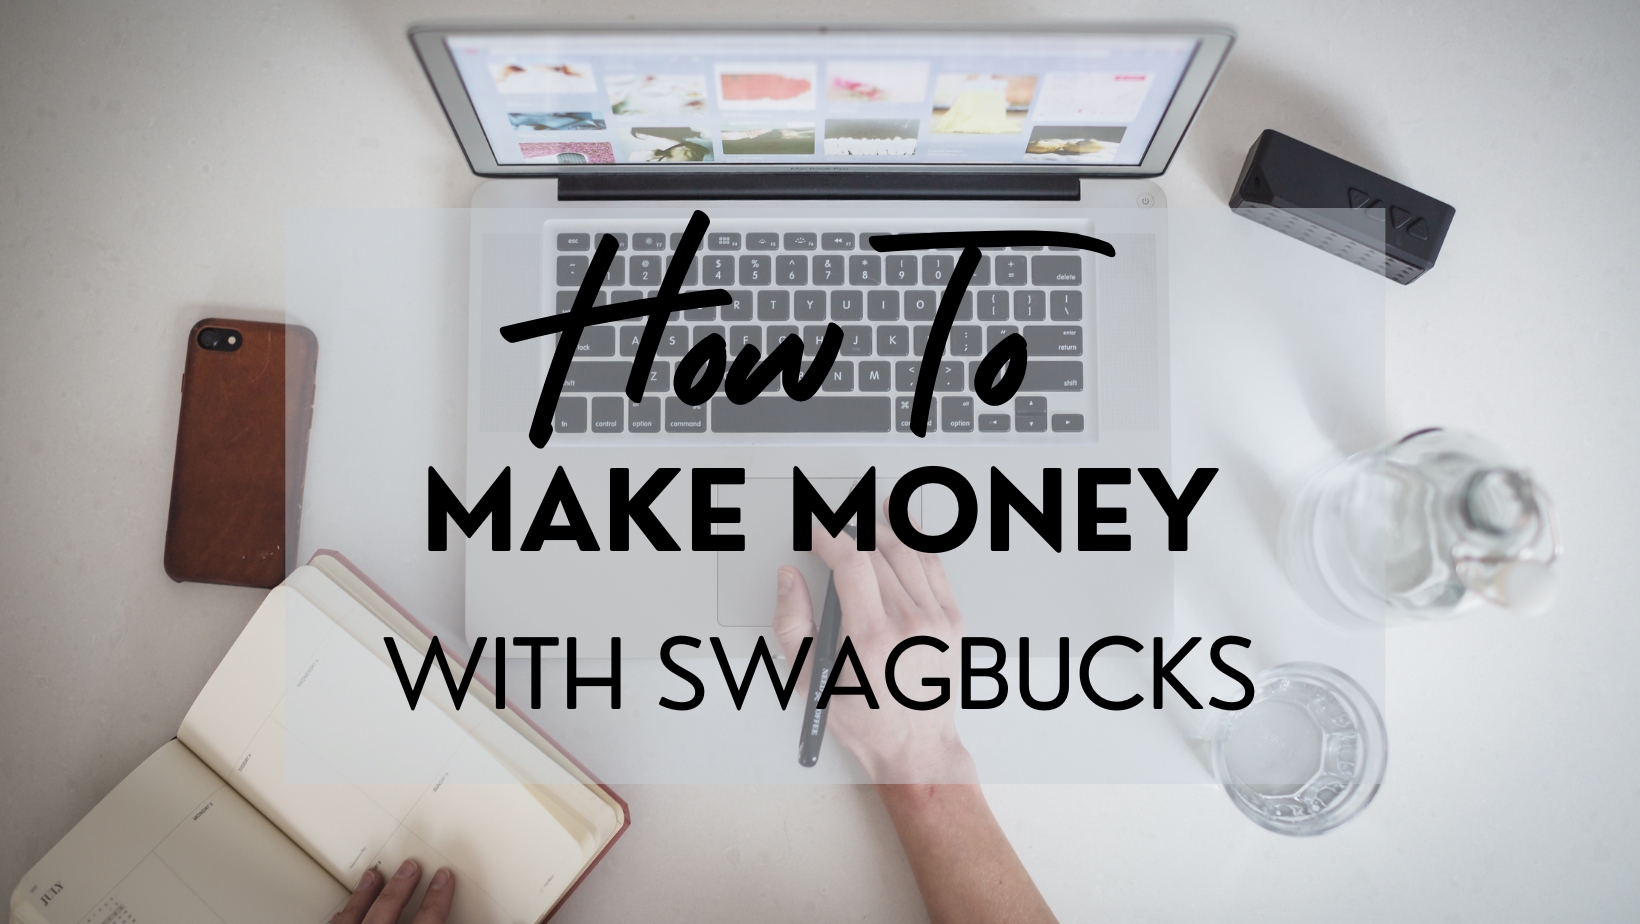 How to Make Money with Swagbucks